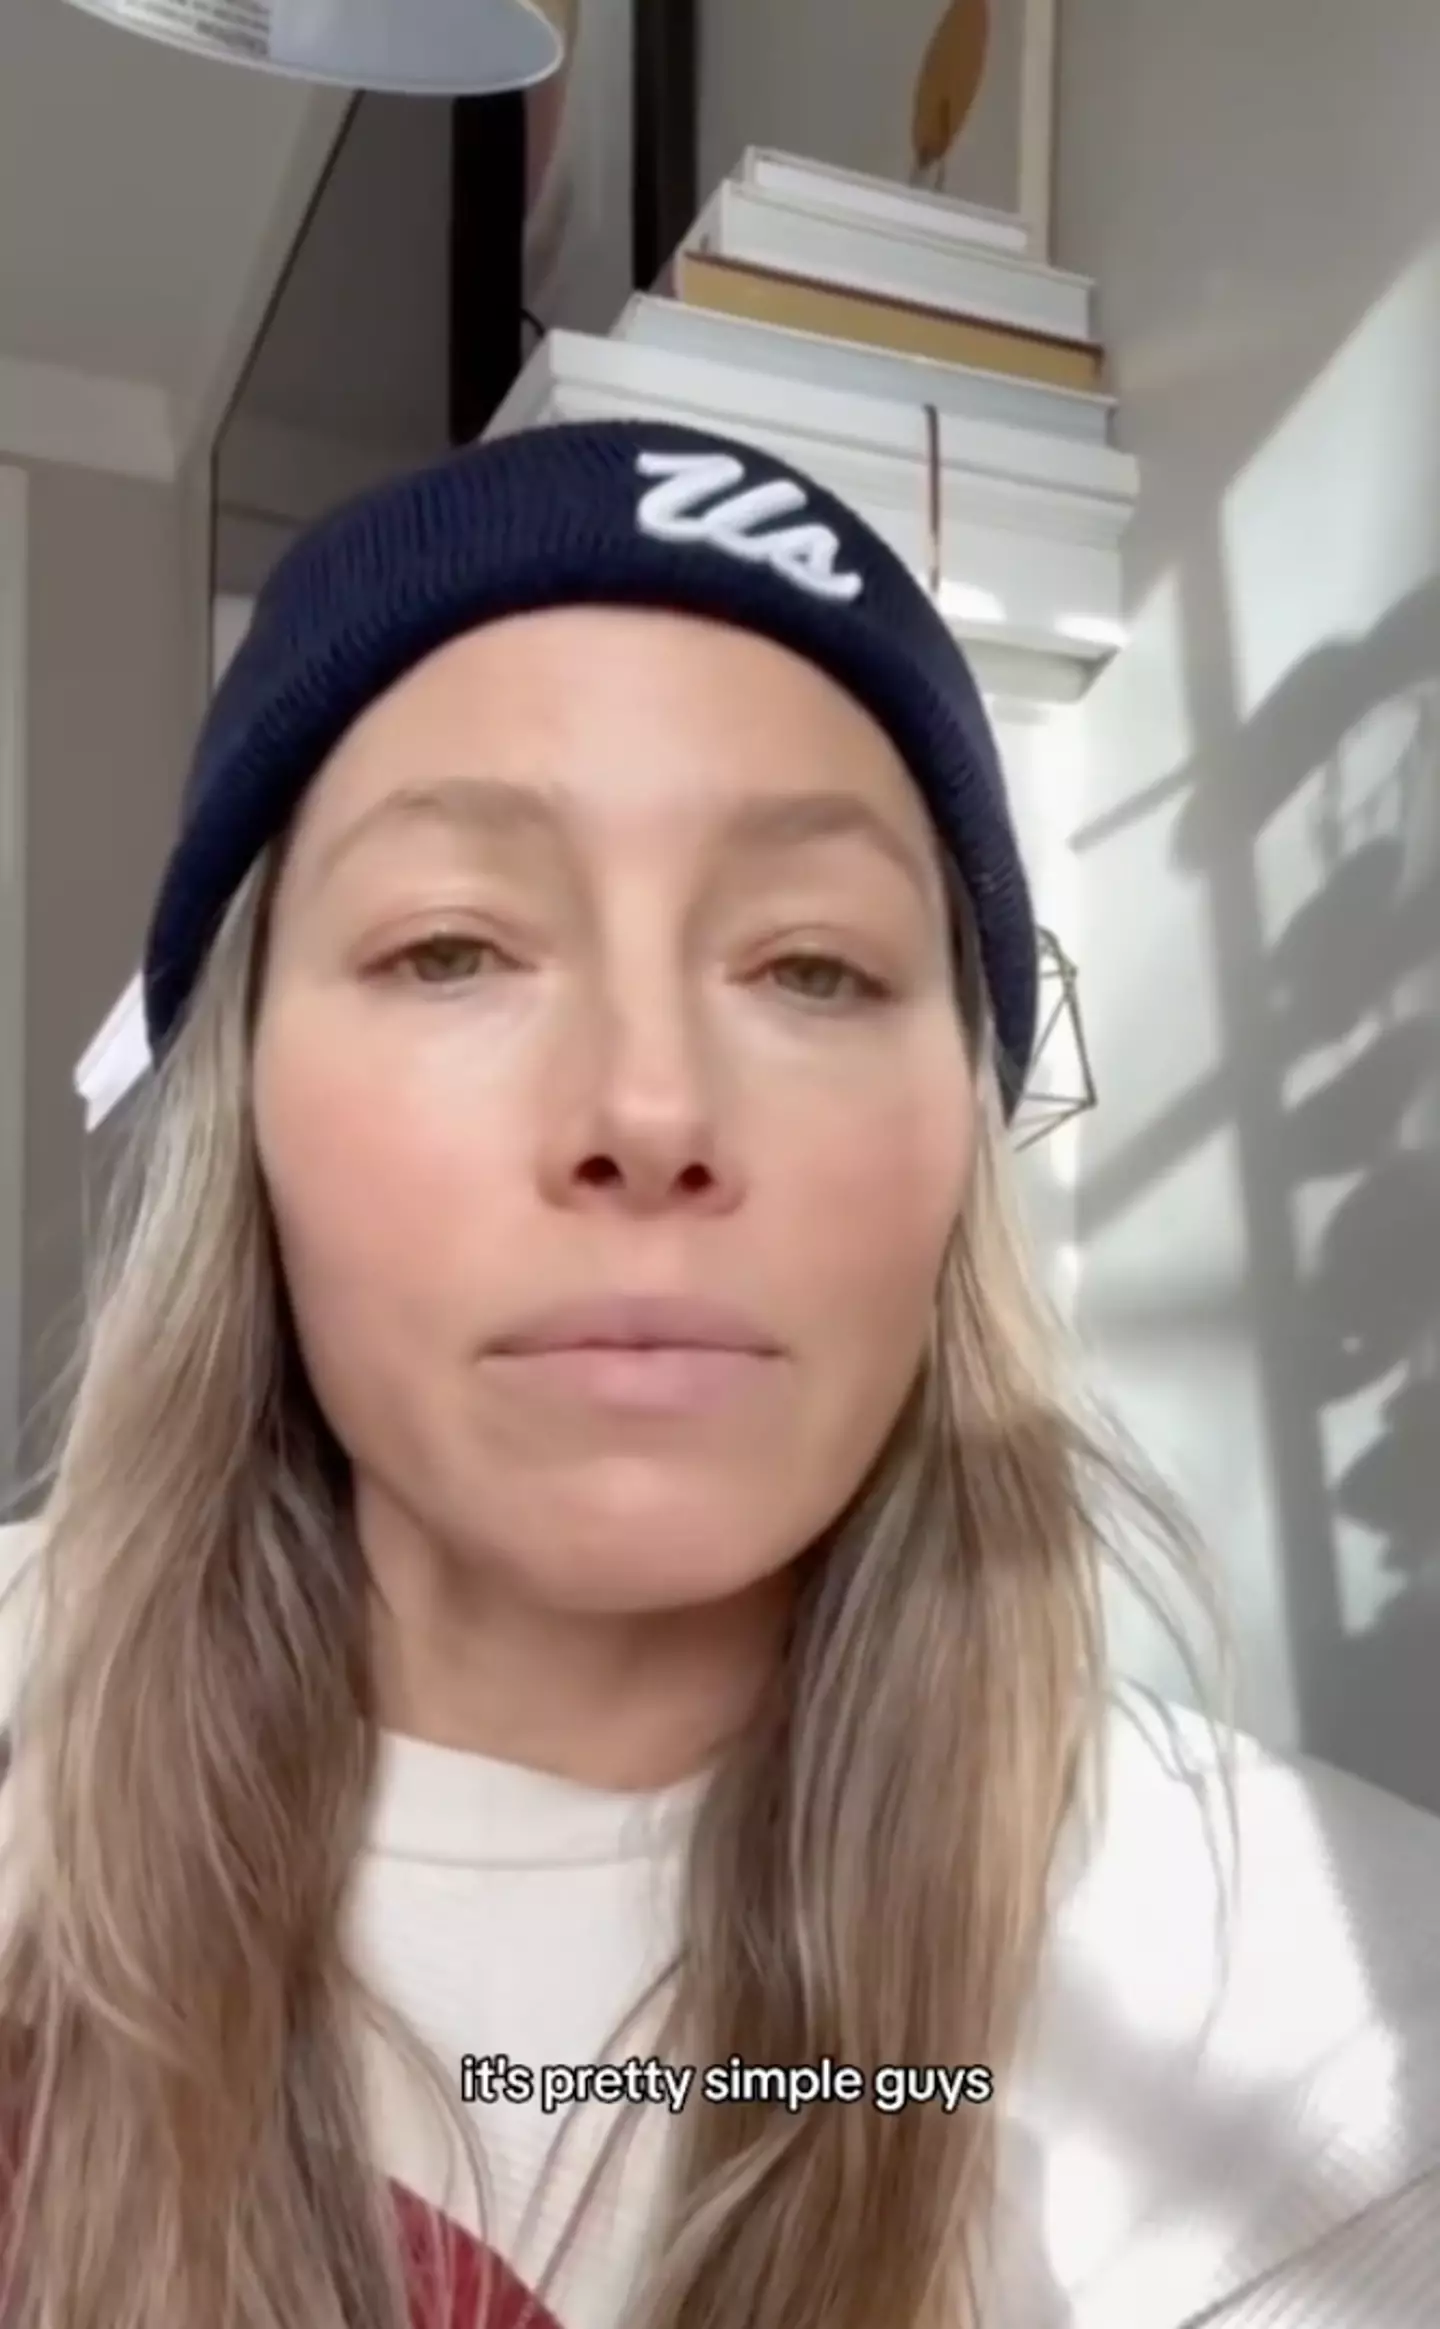 Jessica Biel said she found eating in the shower to be 'deeply satisfying'.